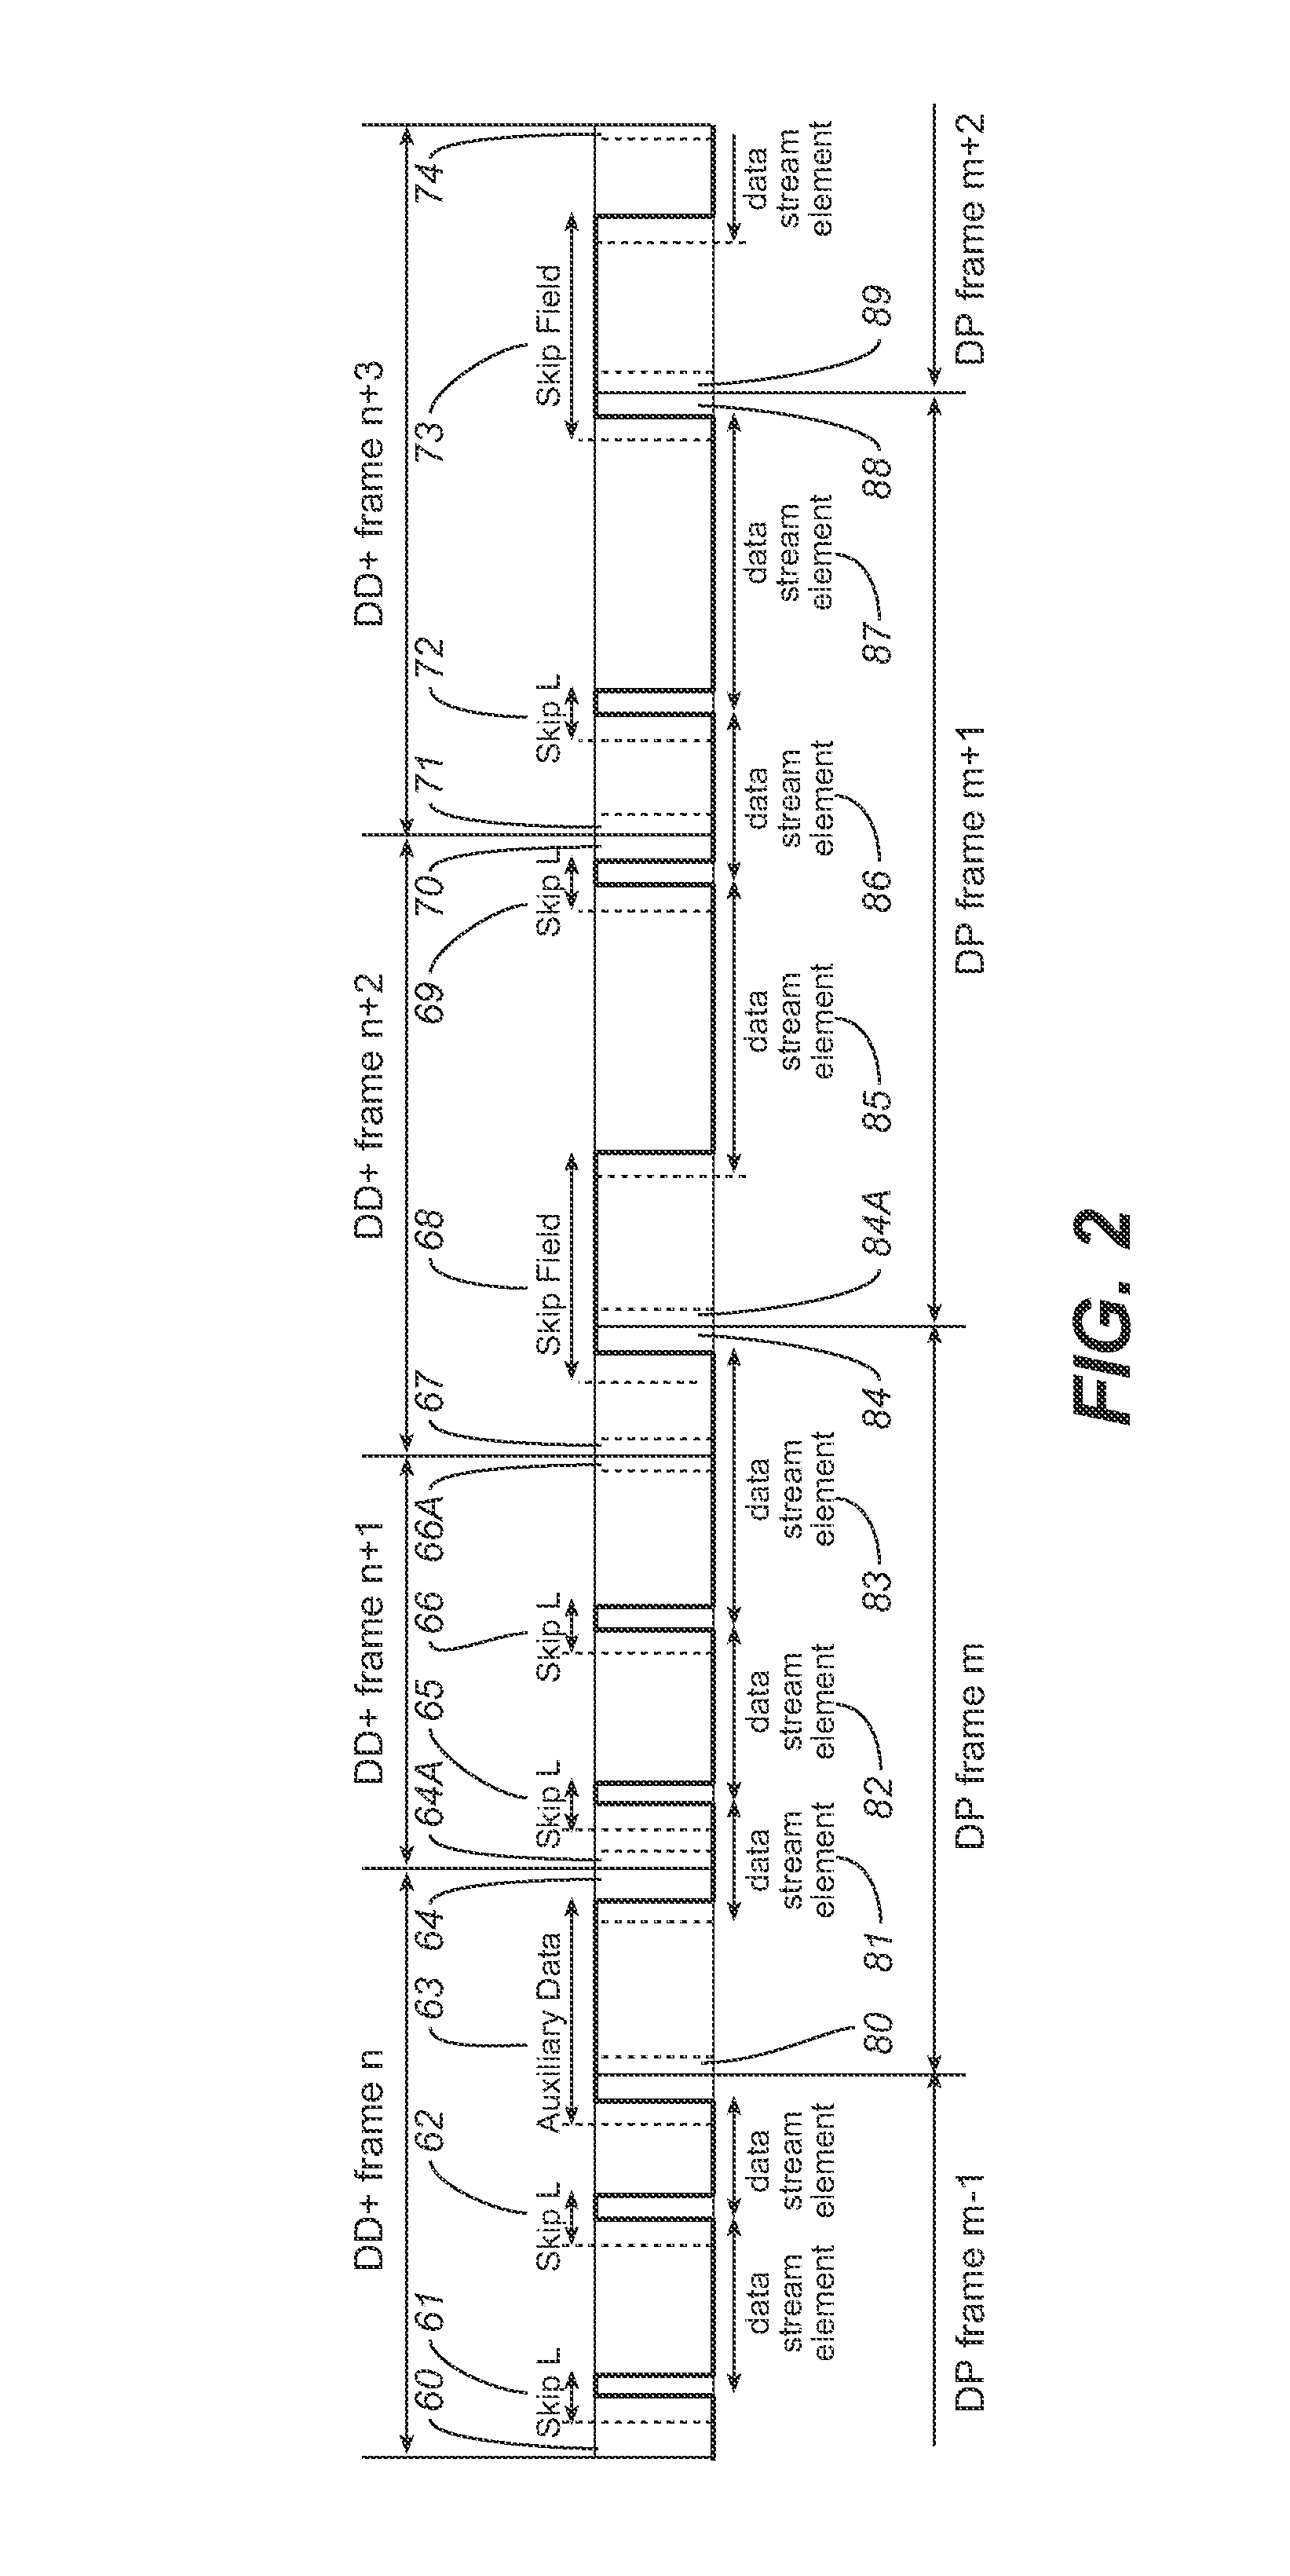 Audio encoding method and system for generating a unified bitstream decodable by decoders implementing different decoding protocols